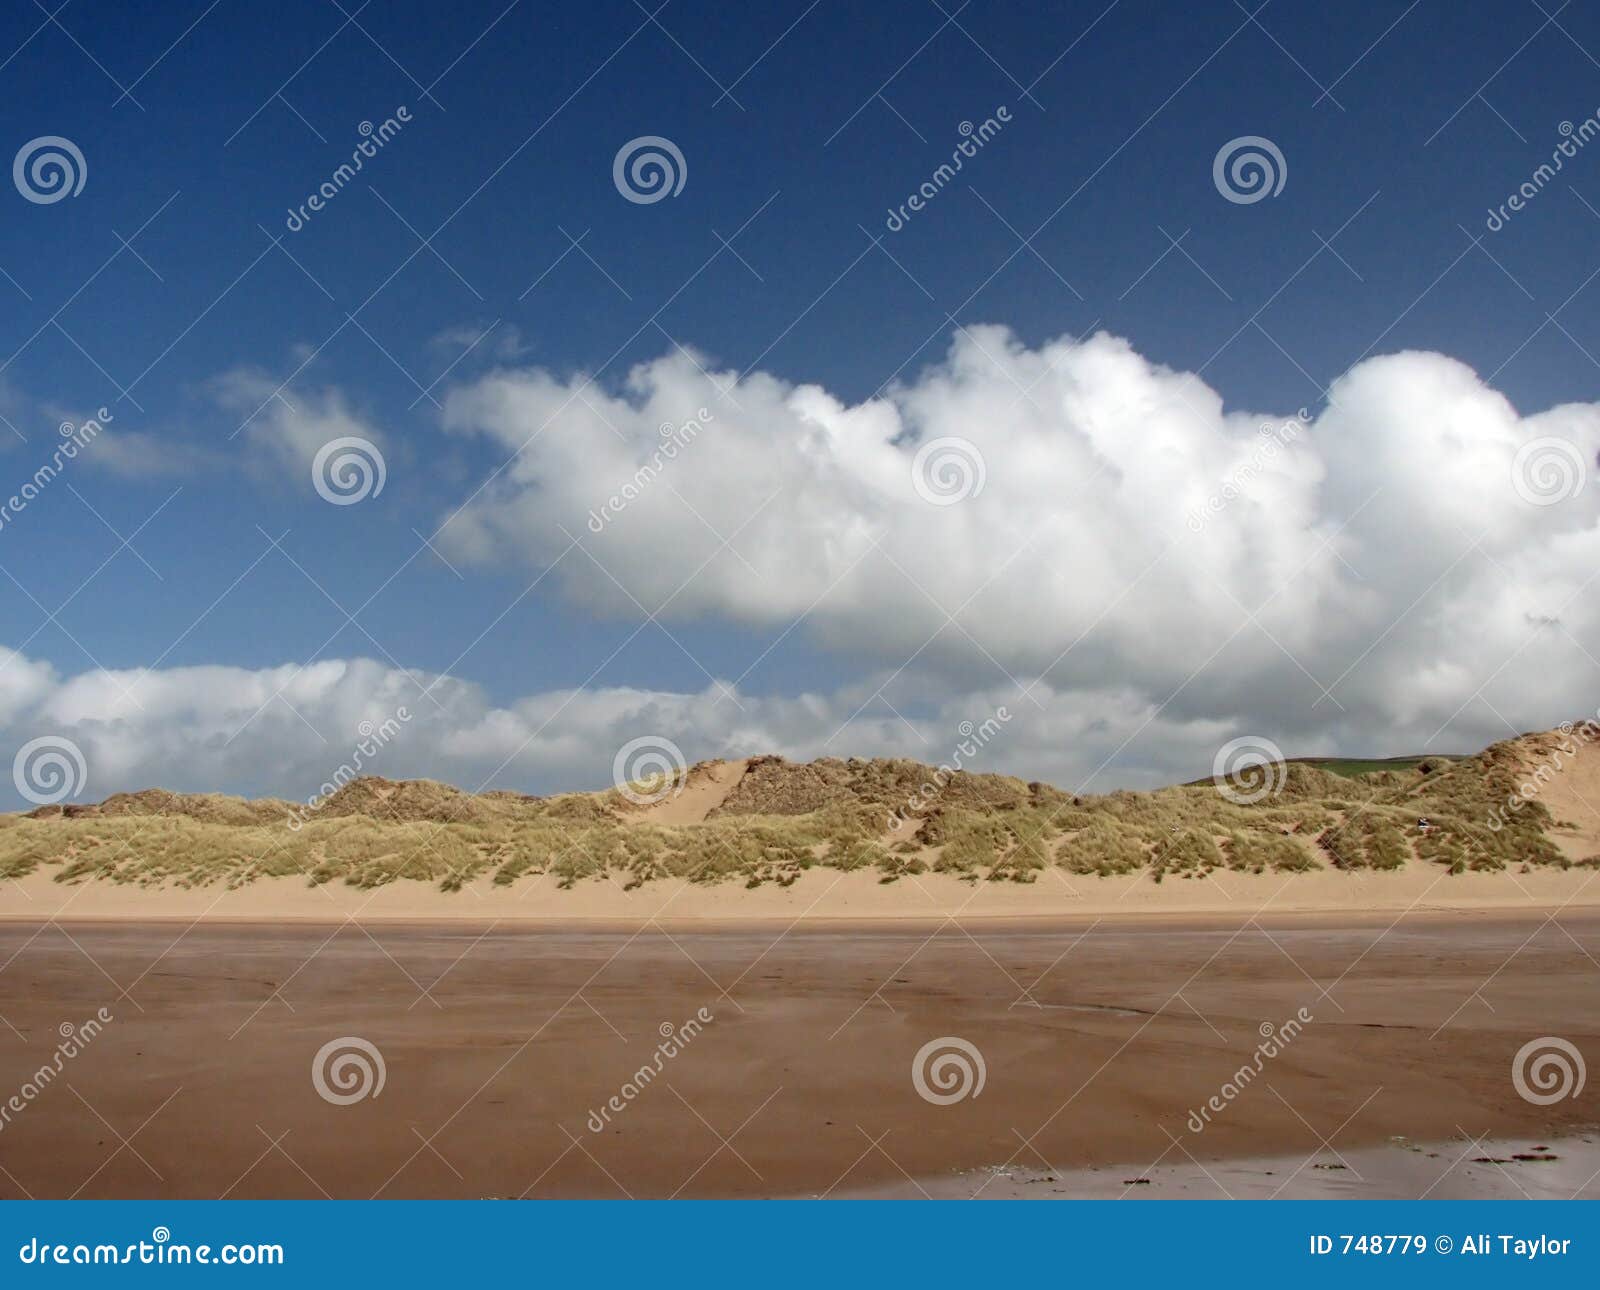 Clouds at the beach stock image. Image of clouds, hills - 748779